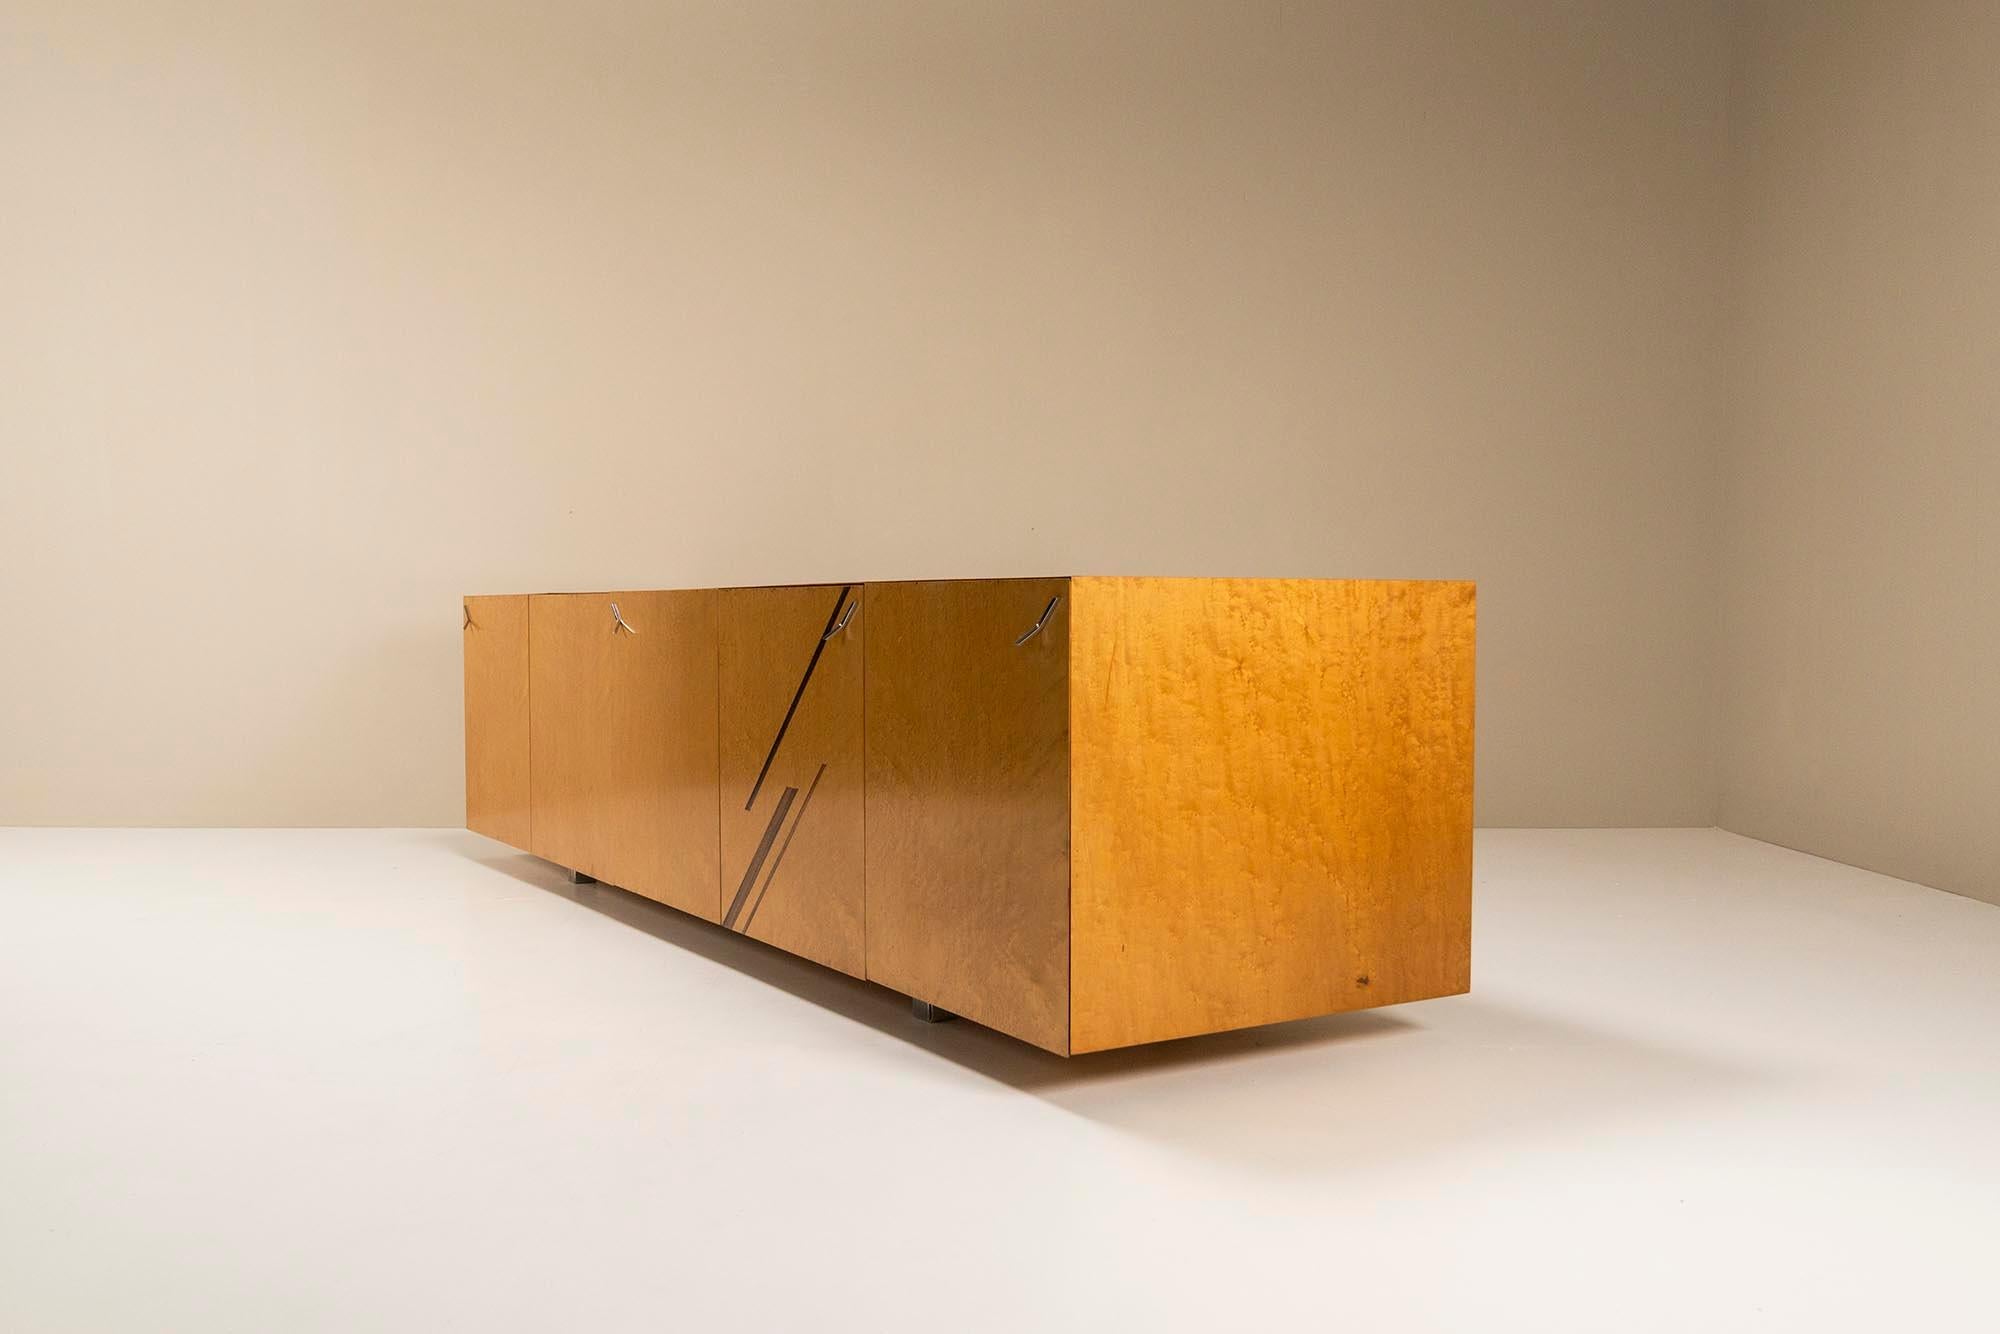 Saporiti's darling Giovanni Offredi showed with this 1970s sideboard from the 'Birds-Eye' series that he remained true to his modernist view on design. As a great critic of the rise of postmodernism back in the sixties and how it influenced Italian